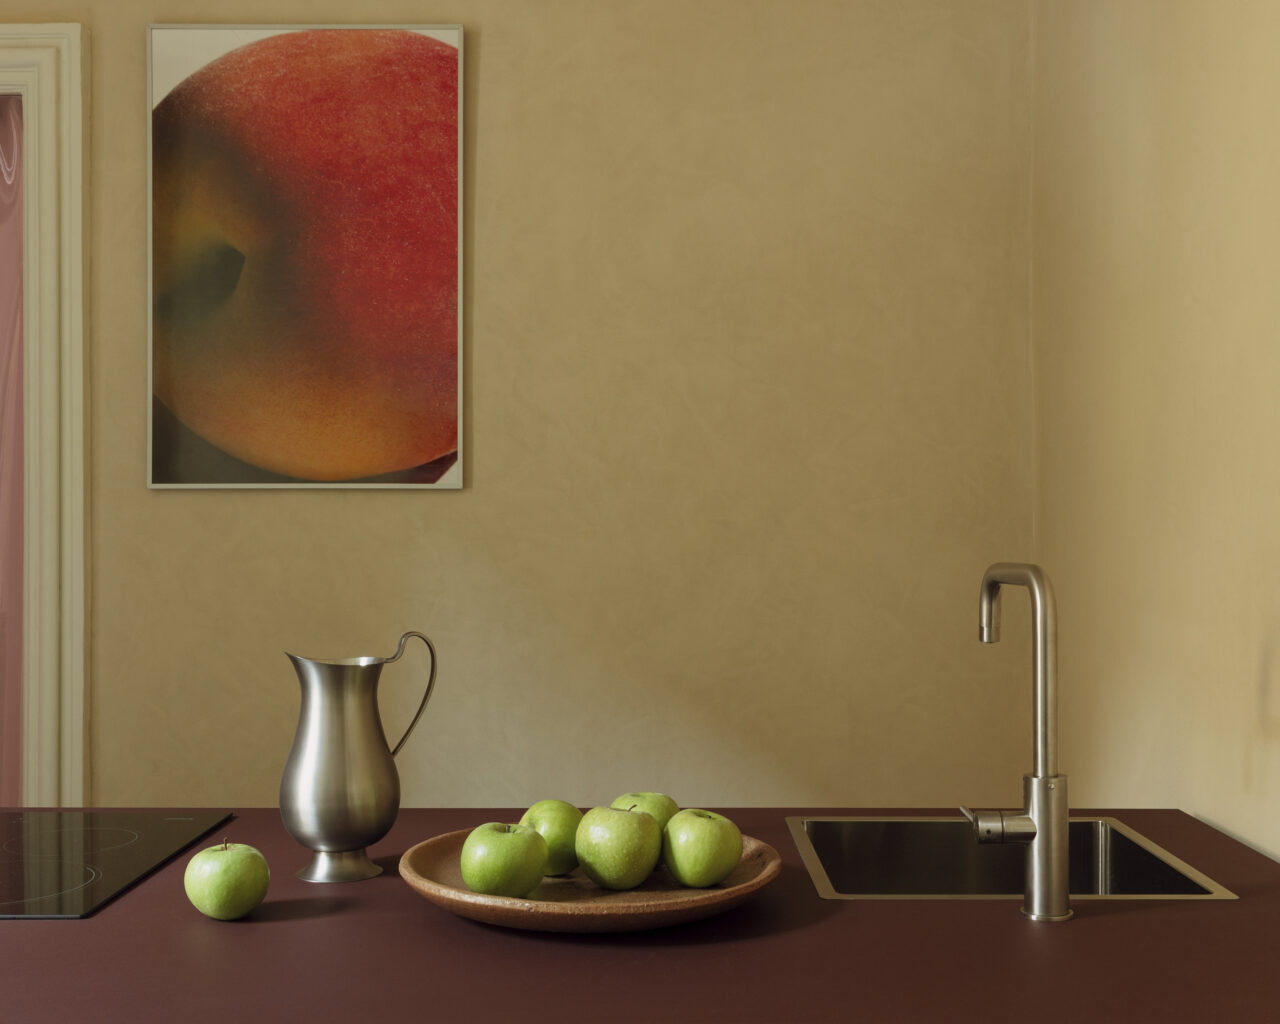 A warm-toned kitchen with fruit on the counter